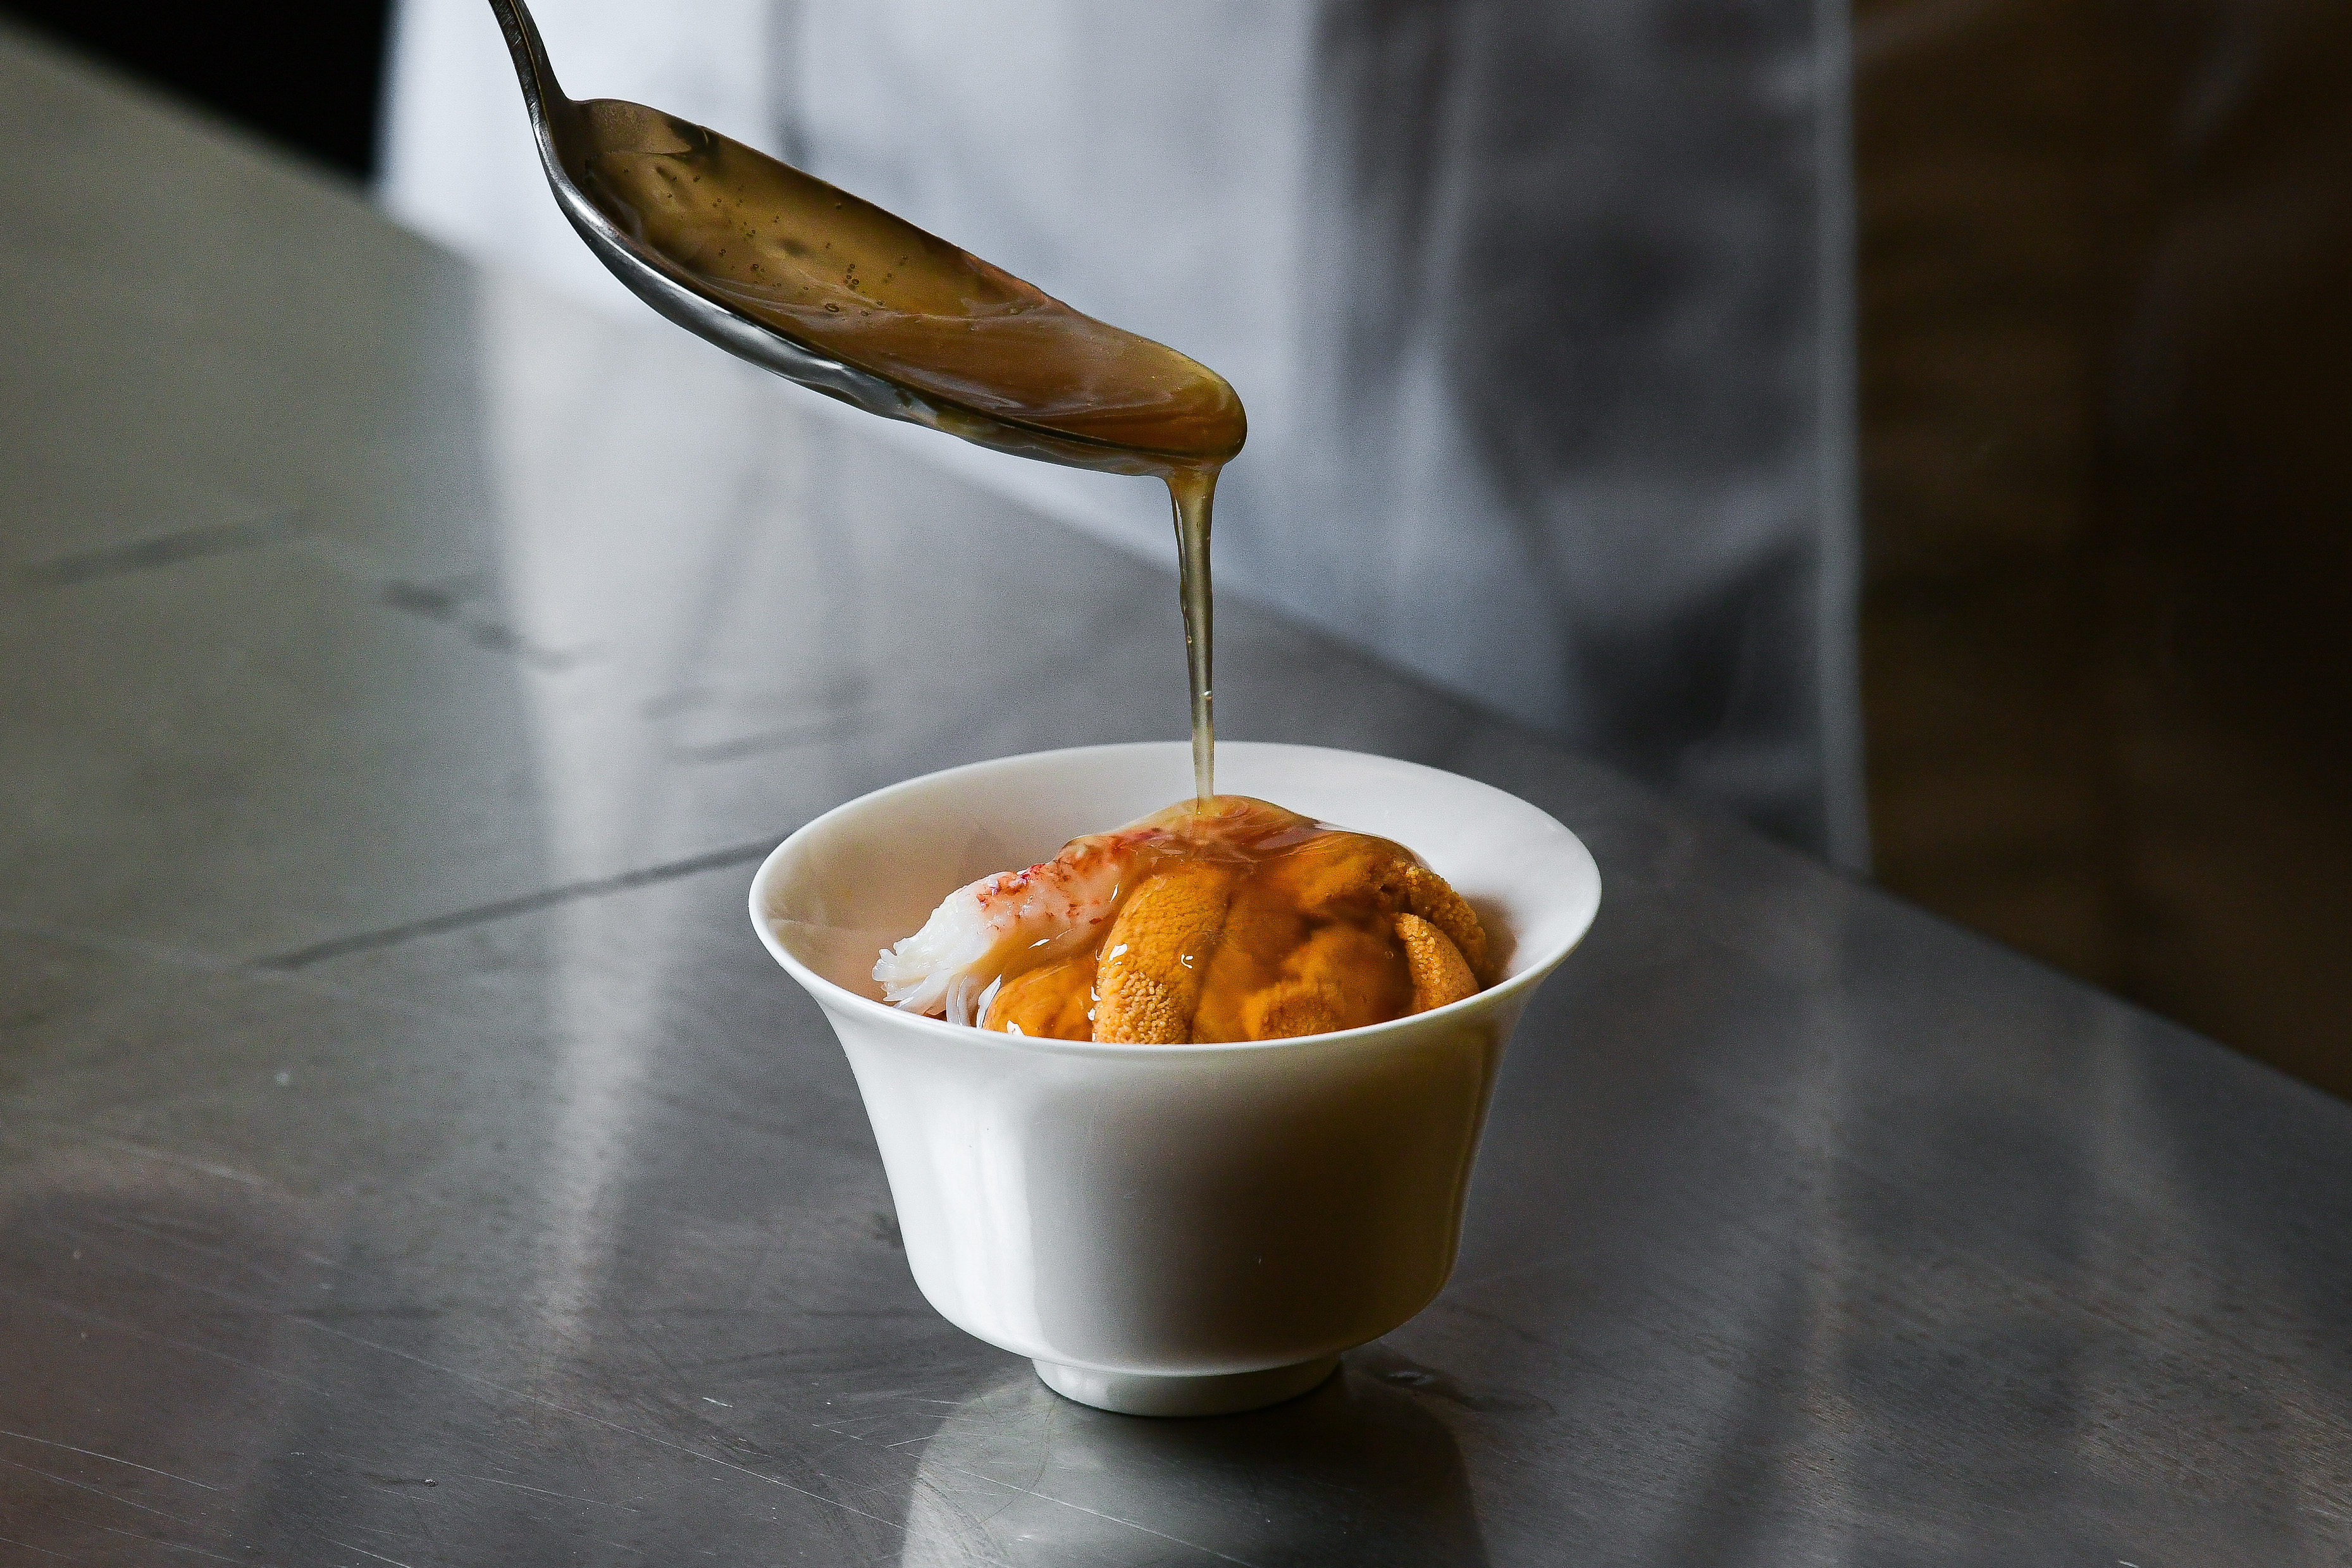 The chawanmushi, a savory egg custard, features delicate strips of uni